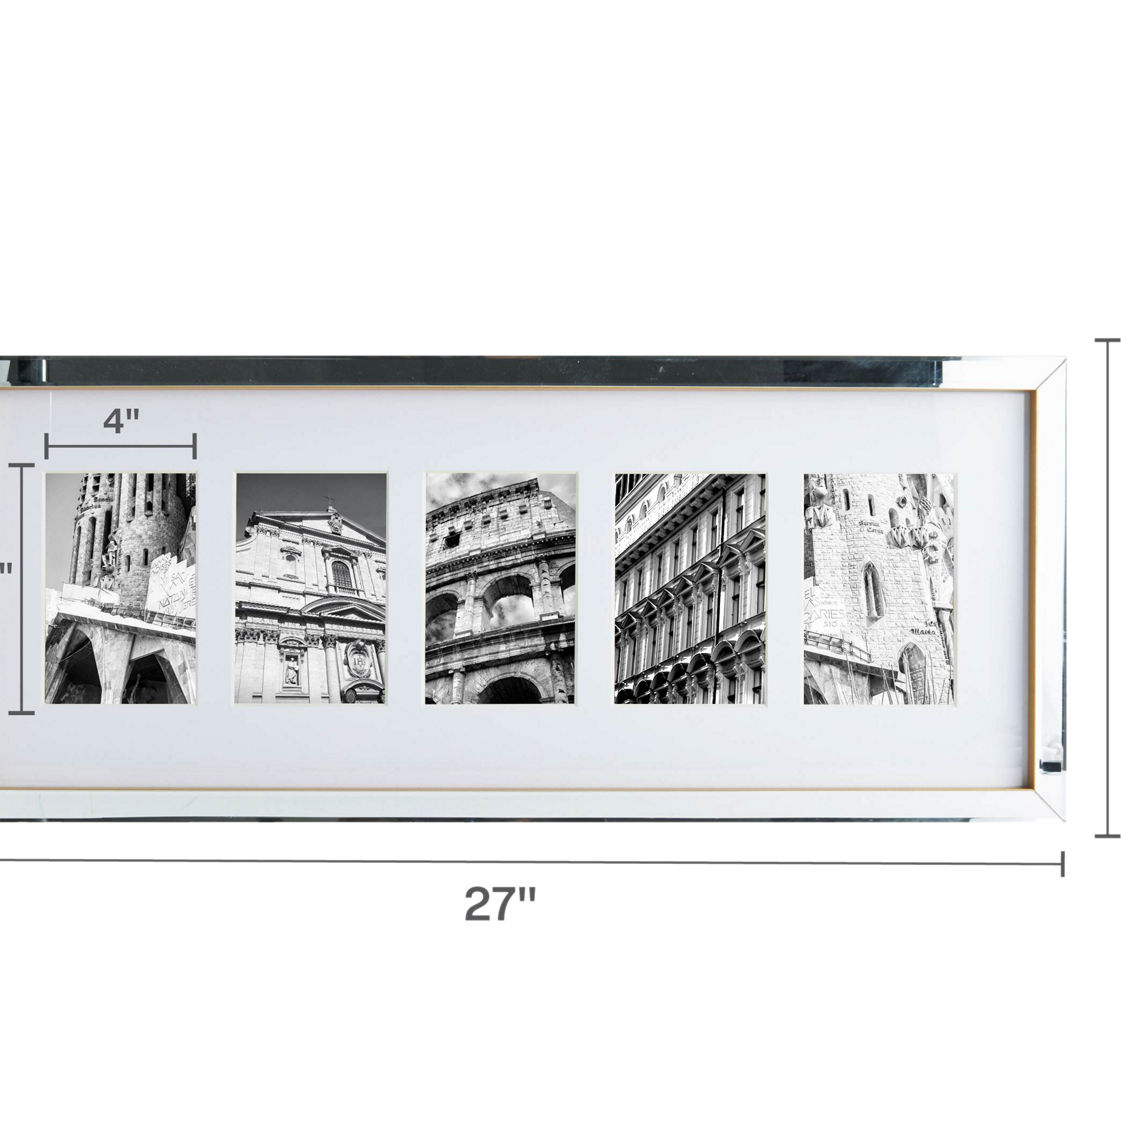 Mikasa Home 11 x 27 in. 5 Opening Mirror Gallery Collage Frame with Gold Sides - Image 5 of 7